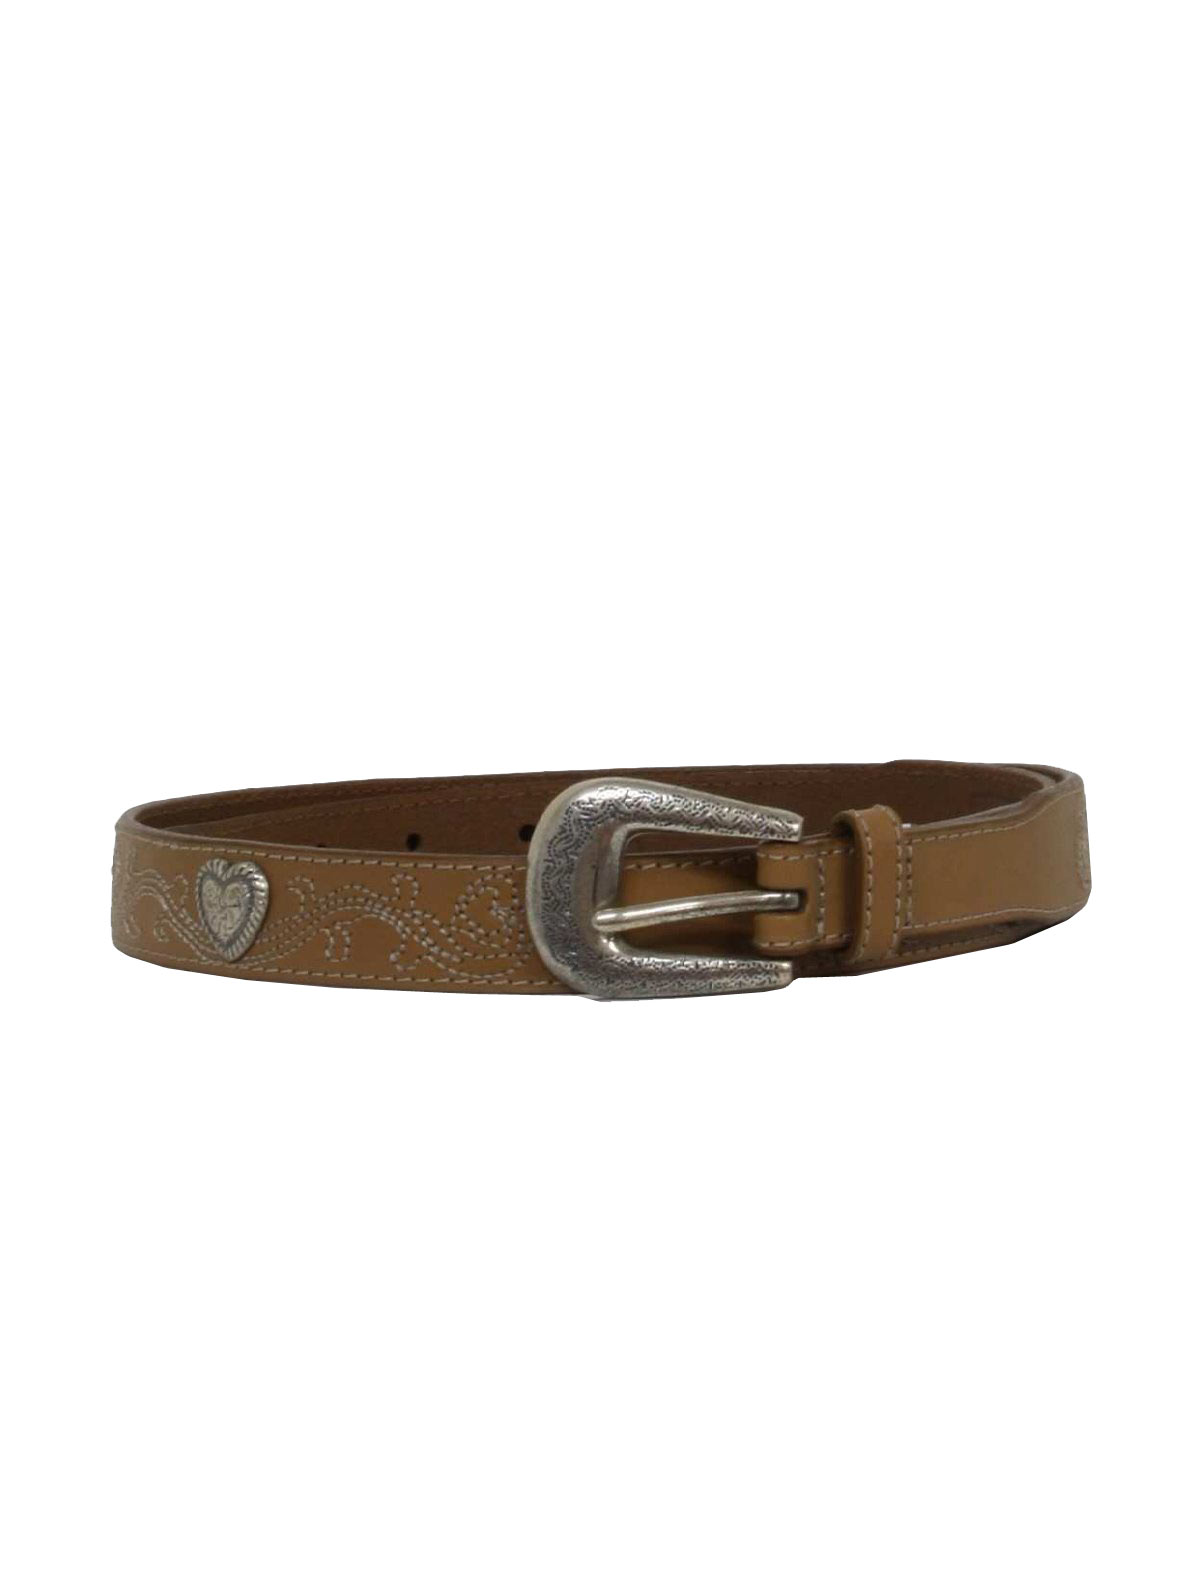 90's Vintage Belt: 90s -Fossil- Womens tan leather top stitched skinny ...